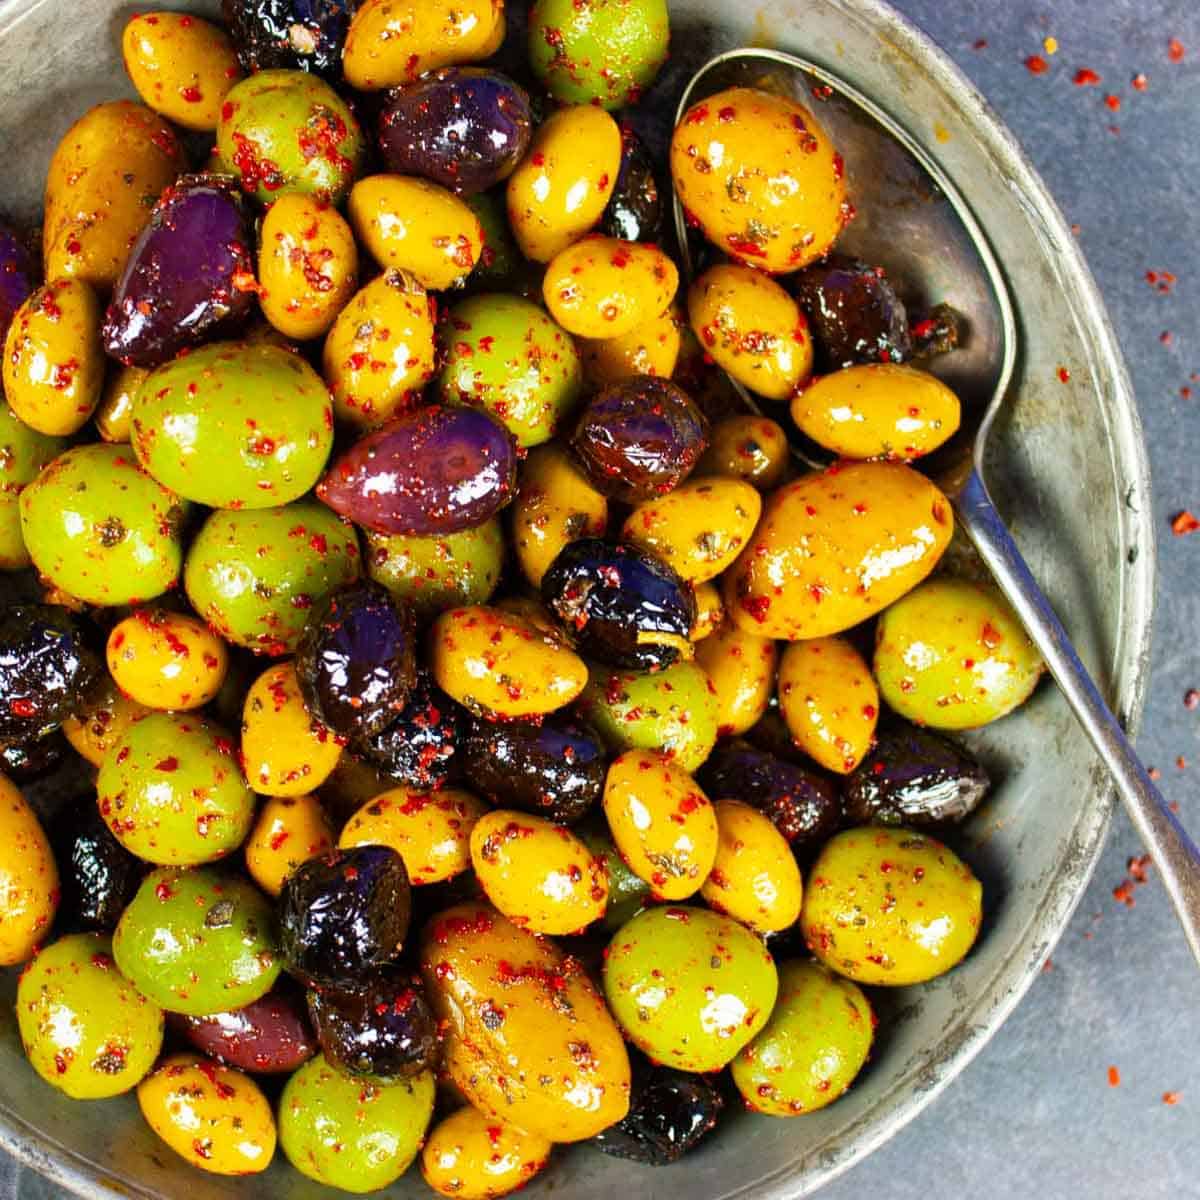 Marinated Almond-Stuffed Olives Recipe: How to Make It